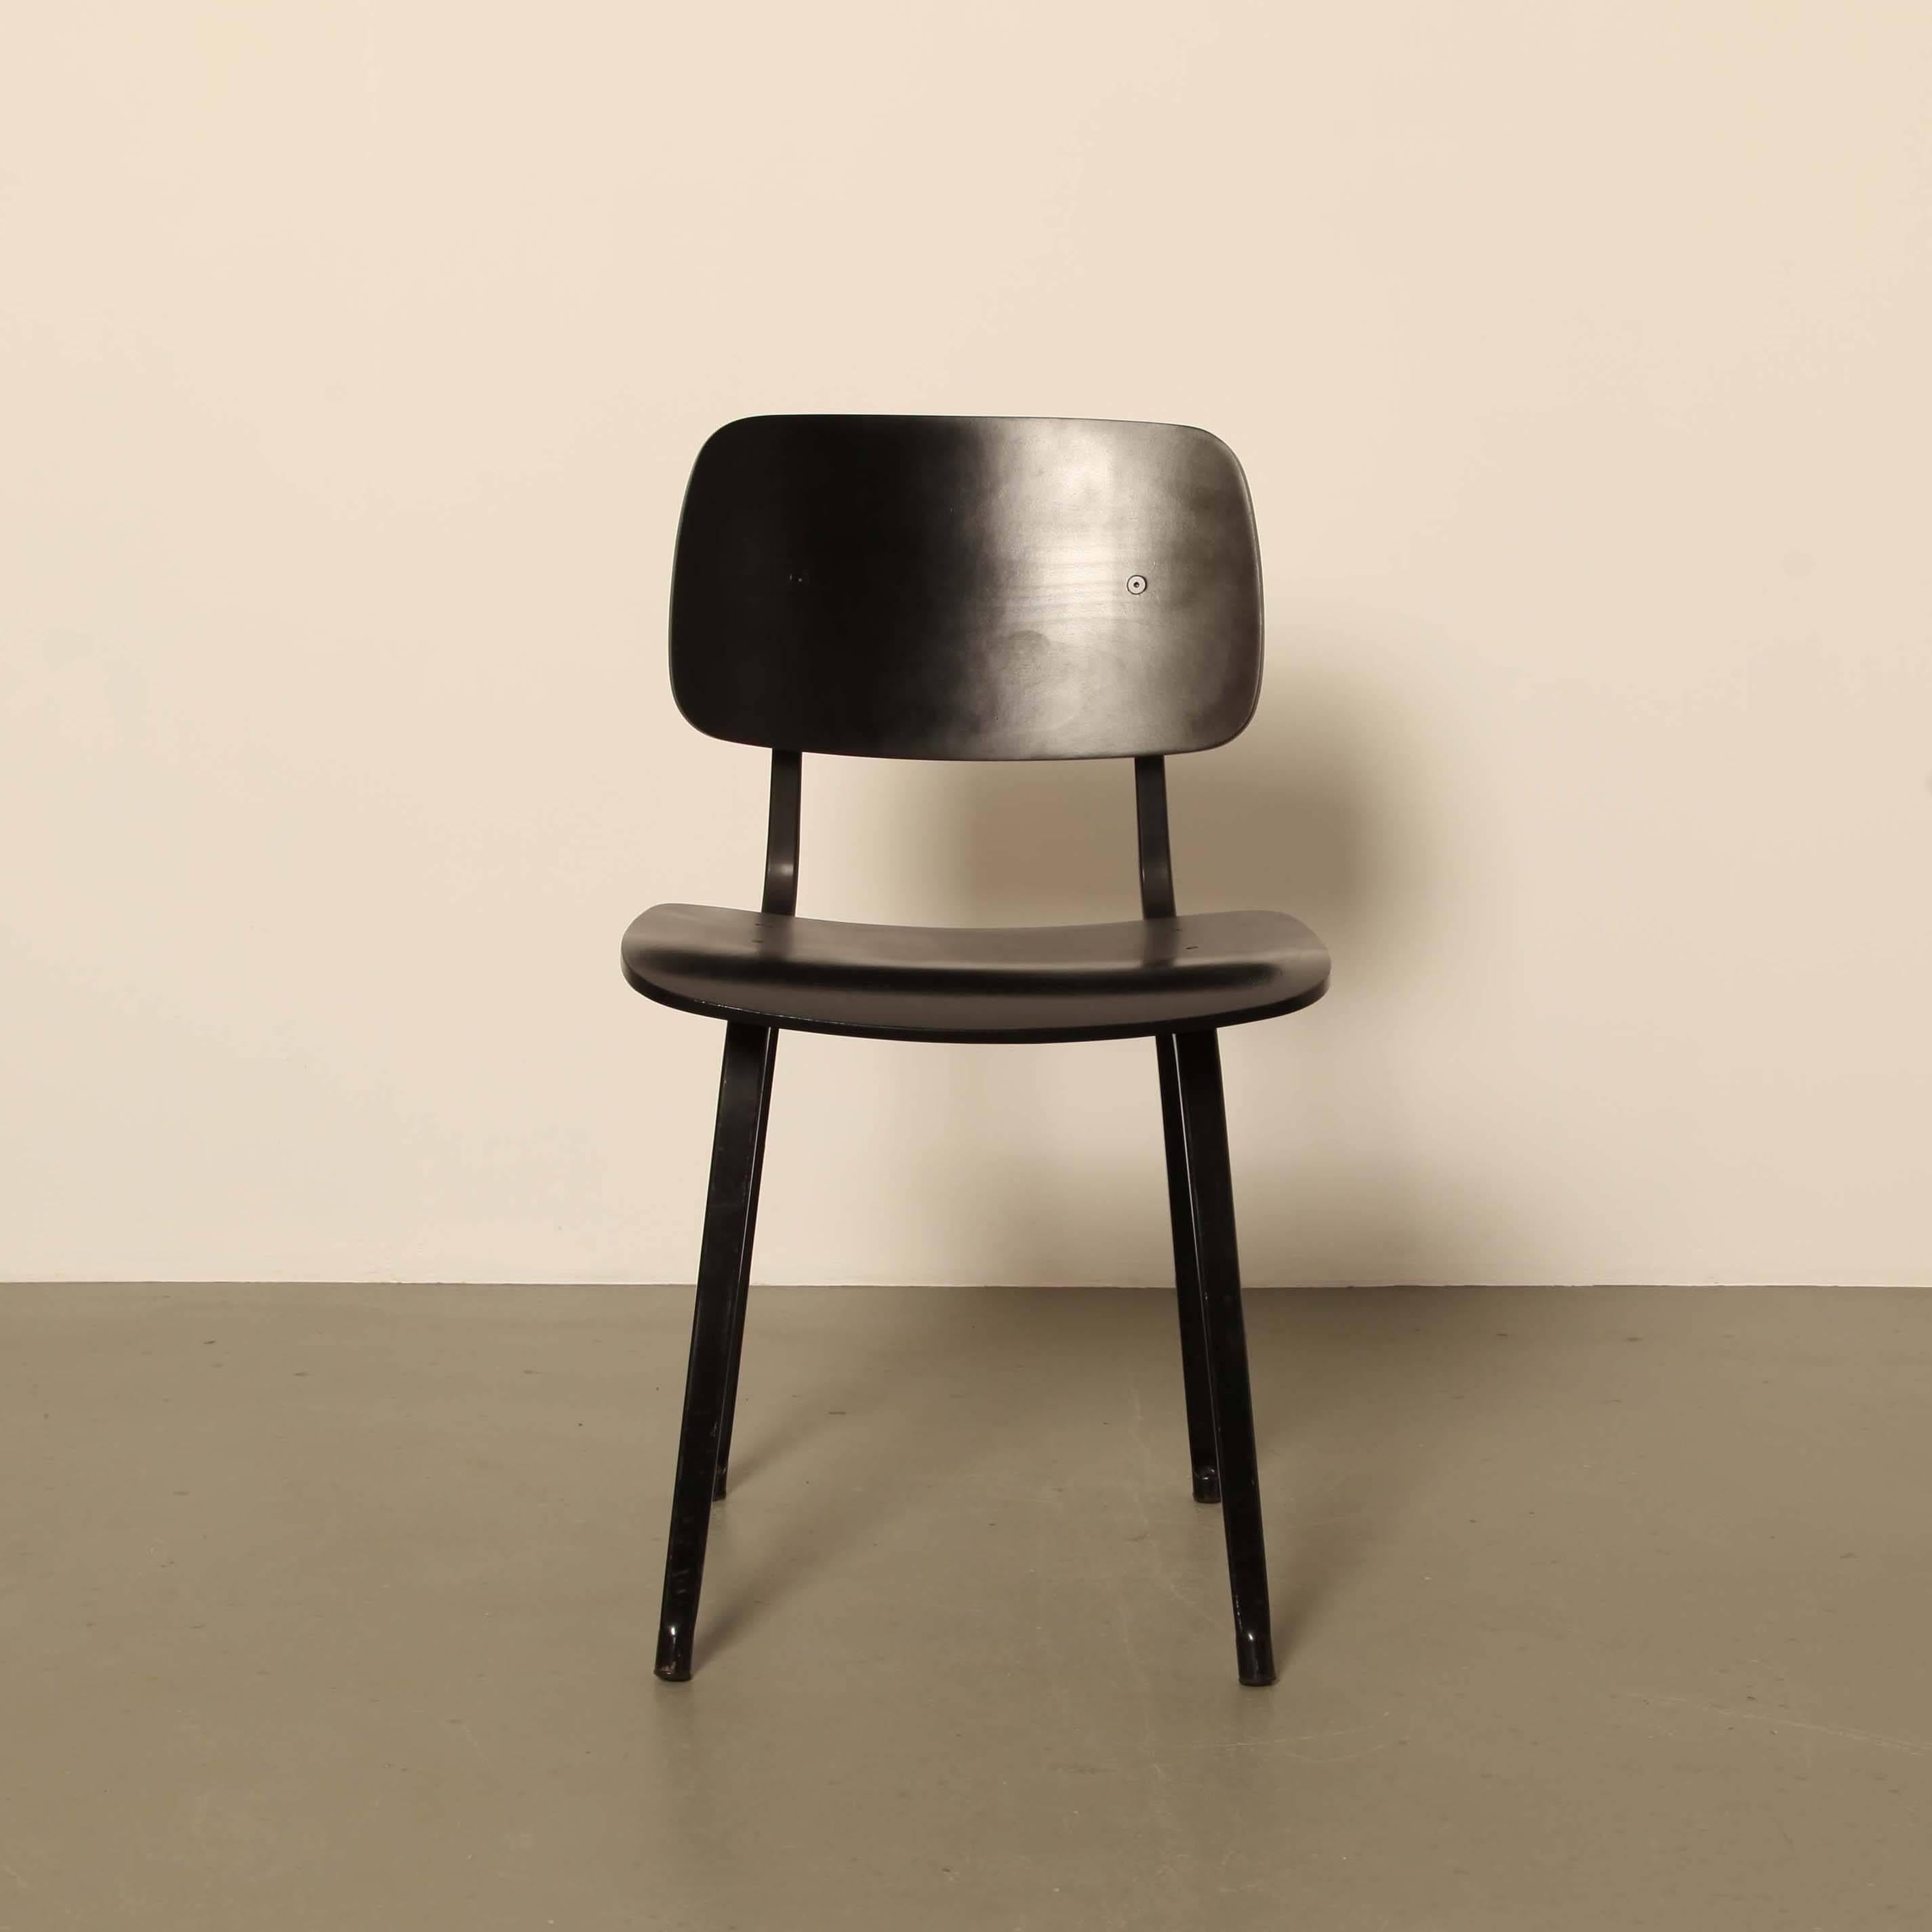 Original frames from the Technical School in Eindhoven with new wood seats and back.

Also available in a dark wood finish.
Also available with armrests.

Designed in 1953.